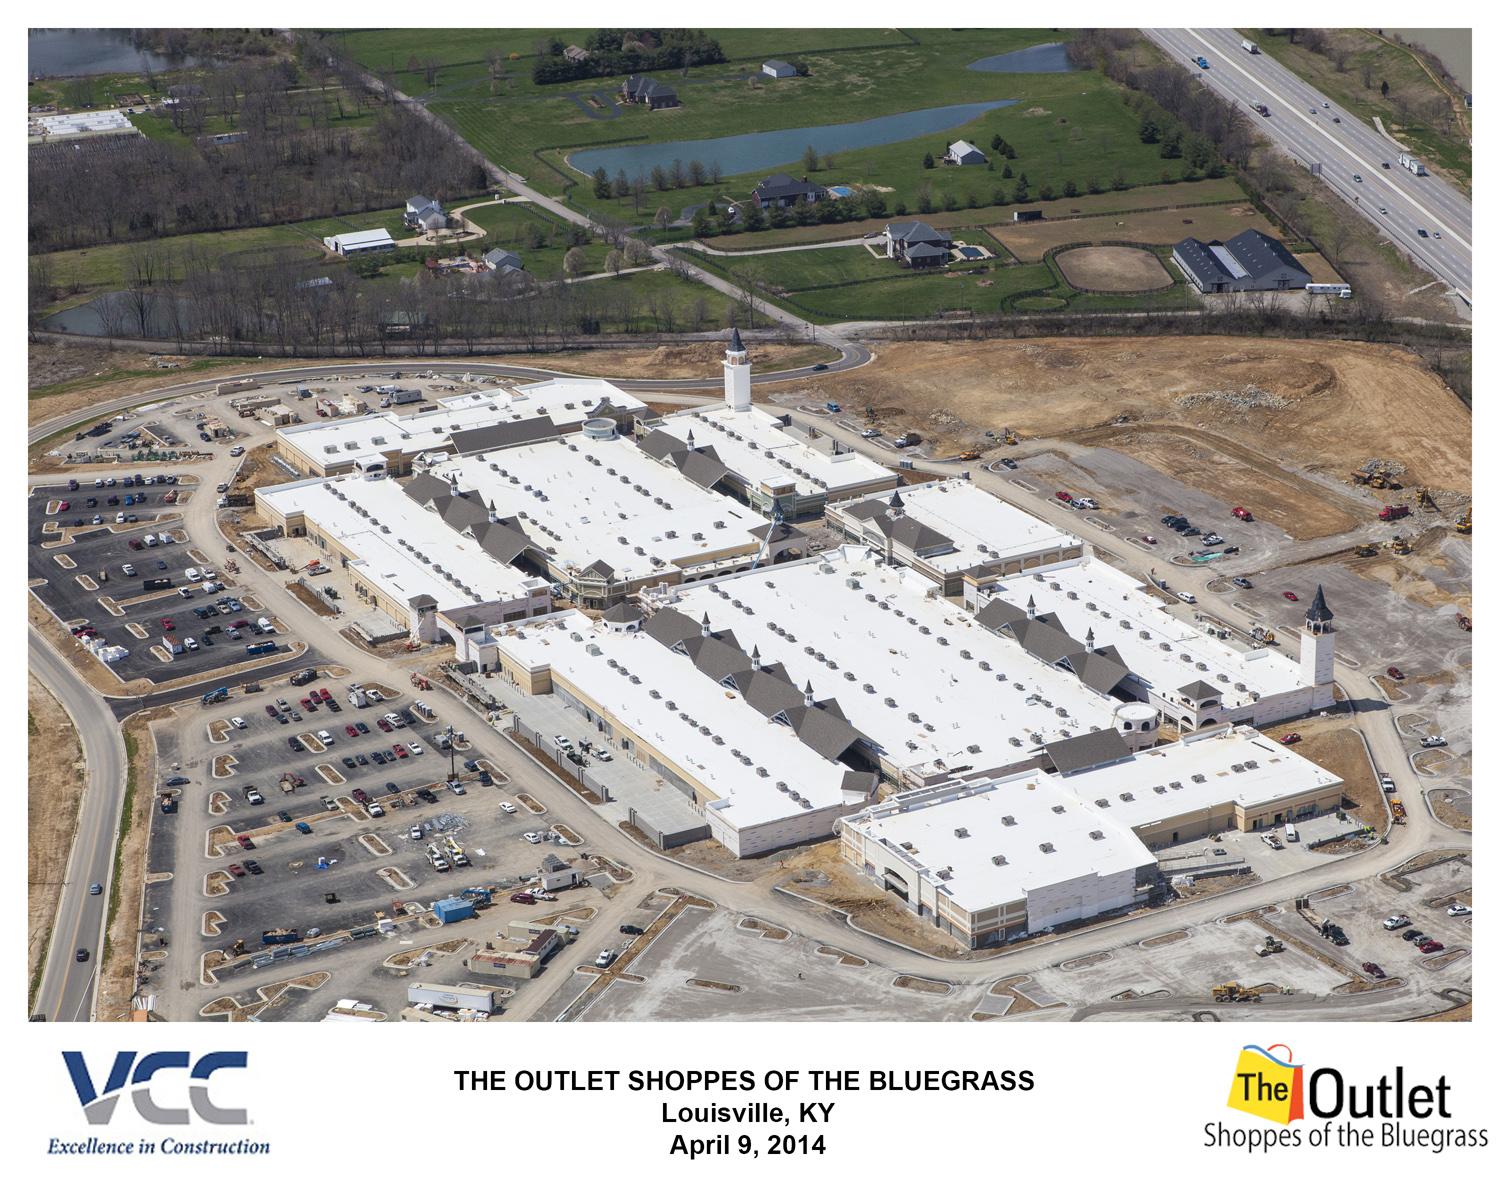 The Outlet Shoppes of the Bluegrass ADAMS ASSOCIATES